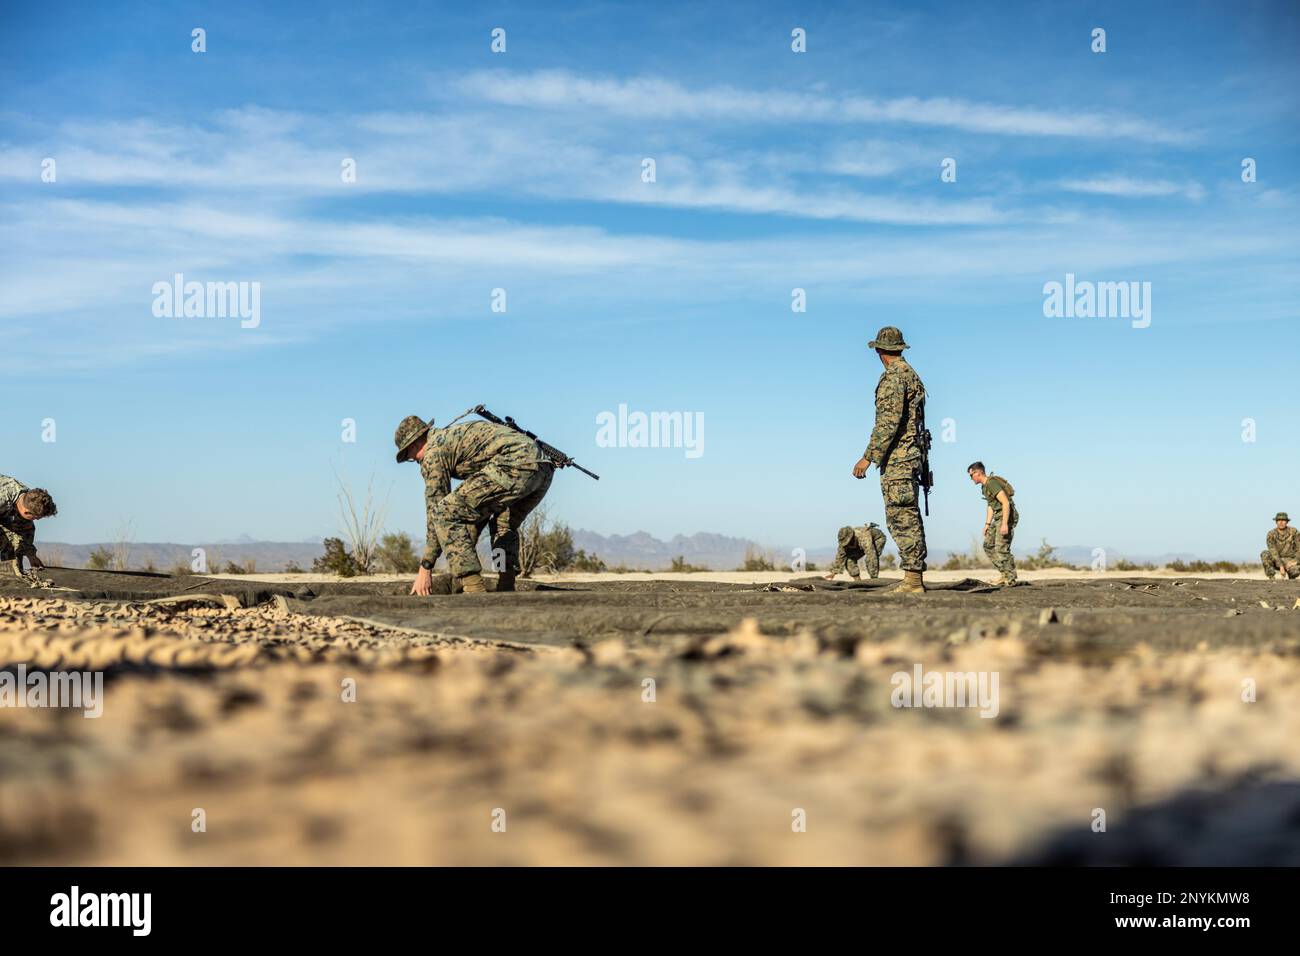 U.S. Marines with 3d Littoral Anti-Air Battalion, 3d Marine Littoral Regiment, 3d Marine Division, prepare to displace during Marine Littoral Regiment Training Exercise (MLR-TE) at Marine Corps Air Station Yuma, Arizona, Feb. 10, 2023. MLR-TE is a large-scale, service-level exercise designed to train, develop, and experiment with the 3d MLR as part of a Marine Air-Ground Task Force operating as a Stand-in Force across a contested and distributed maritime environment. Stock Photo